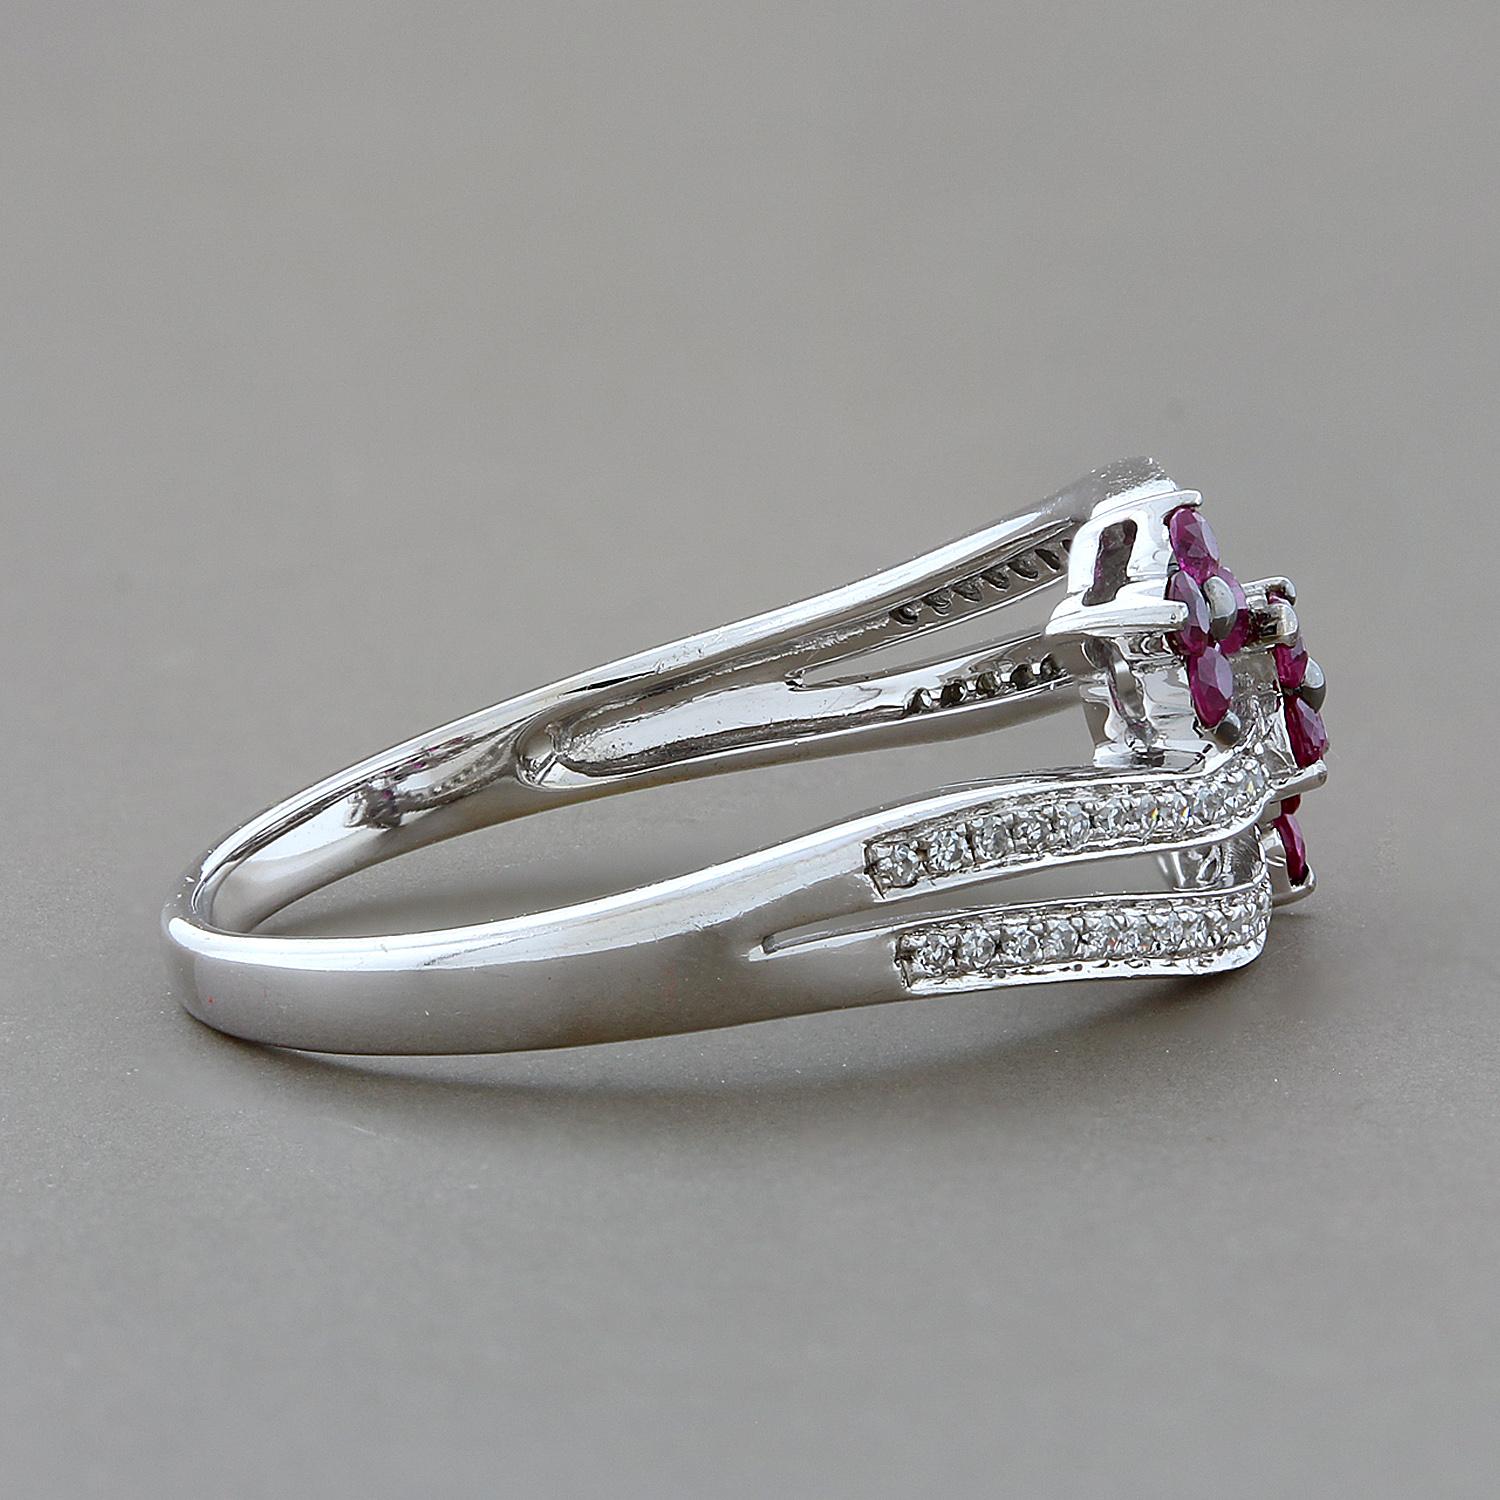 Fun and feminine! This ring features 0.24 carats of red rubies creating three florets. Each floret sits on its own band which then converge into one seamless shank that is set in 14K white gold and accented by 0.13 carats of diamonds. 

Currently